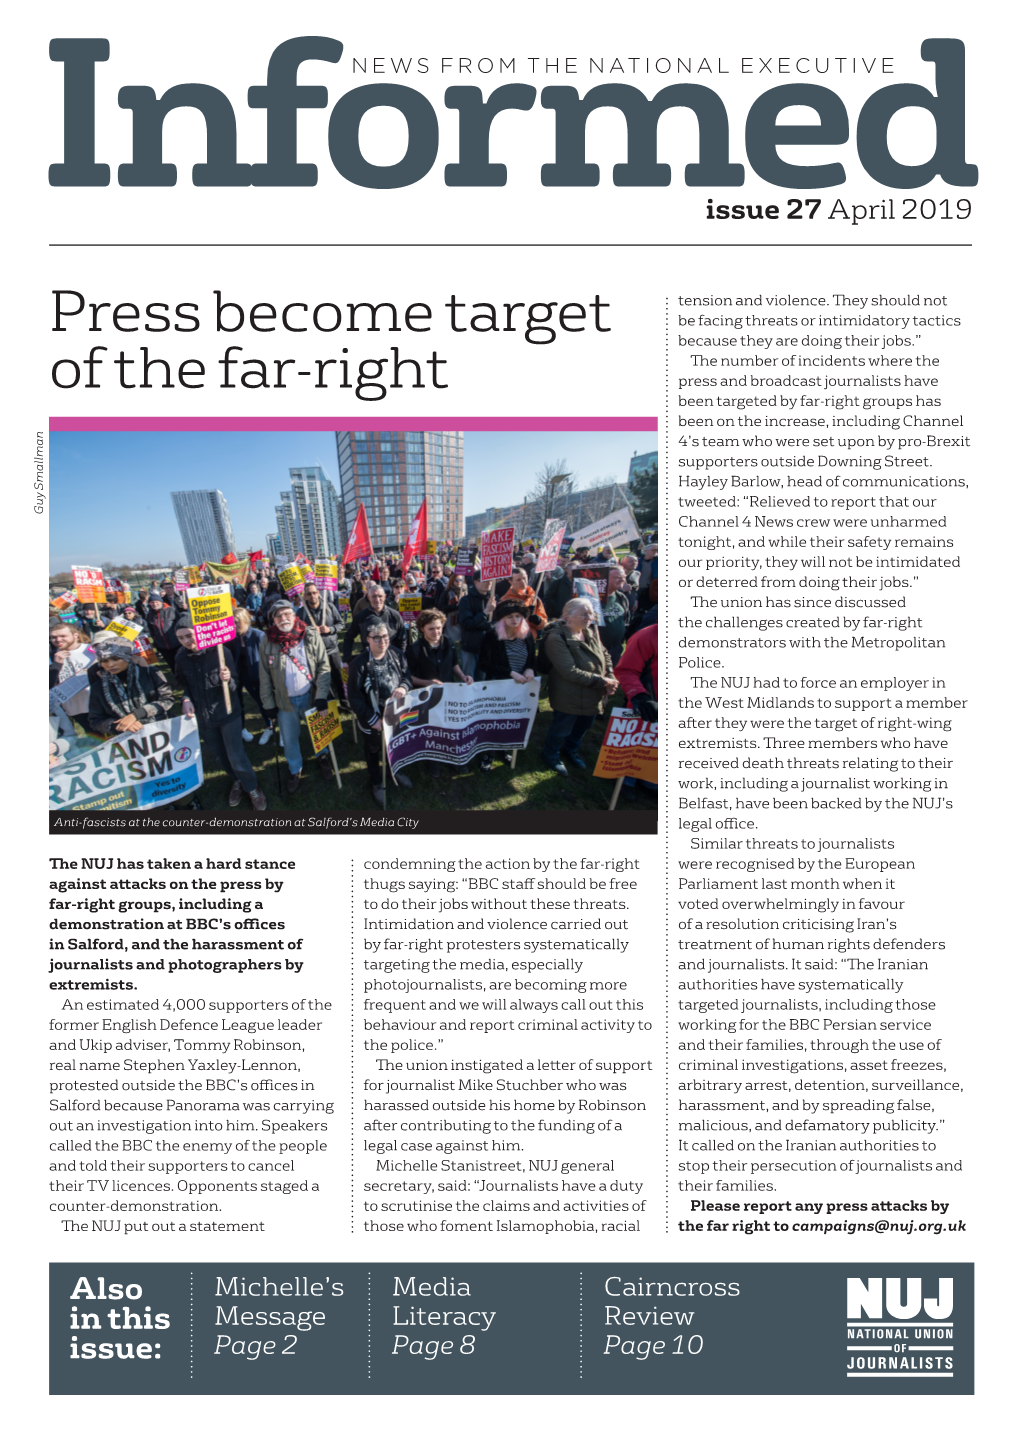 Press Become Target of the Far-Right